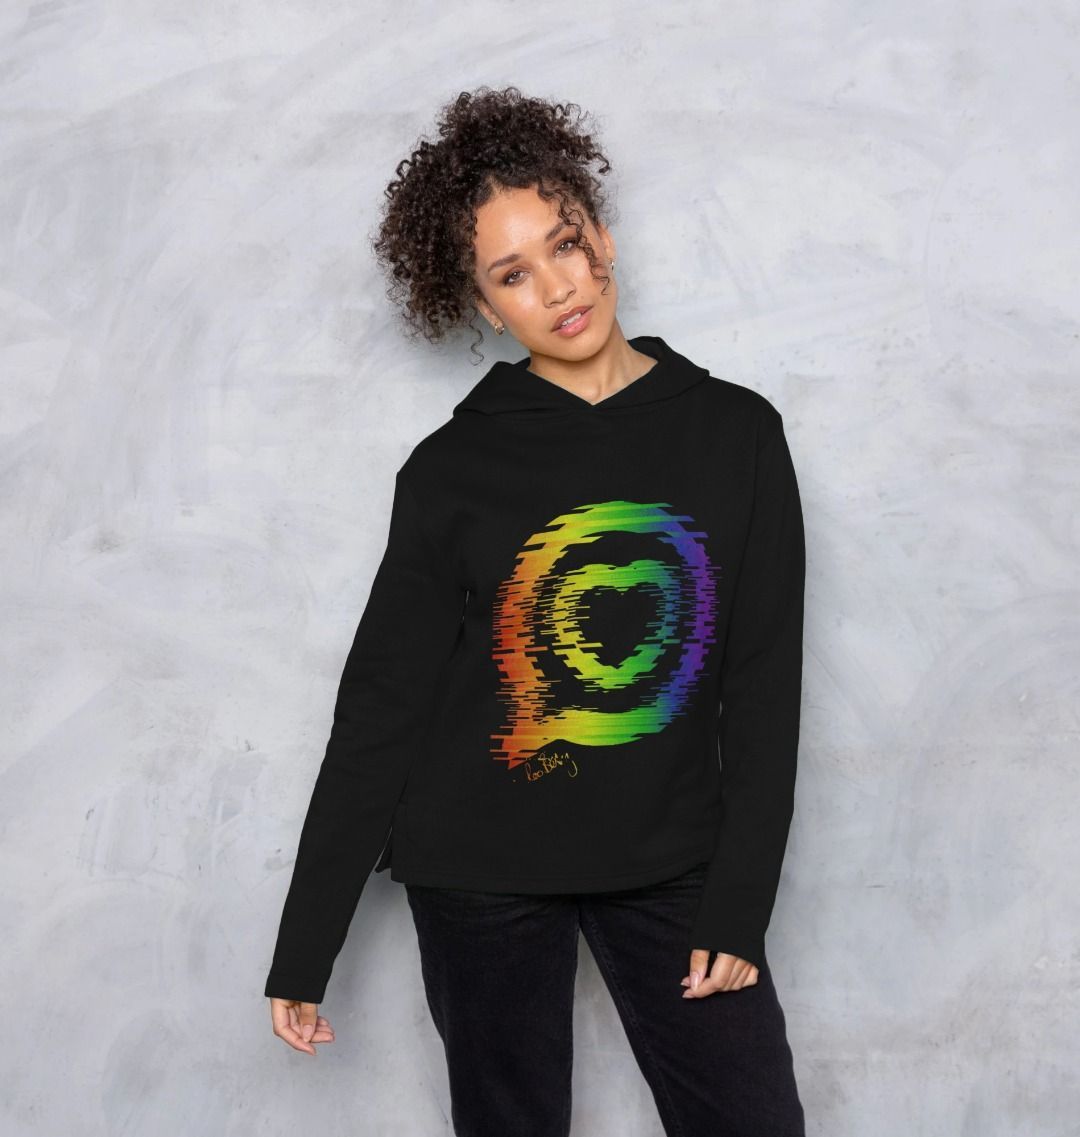 Woman wears relaxed fit black hooded top with the roo betty logo in "torn" rainbow design 